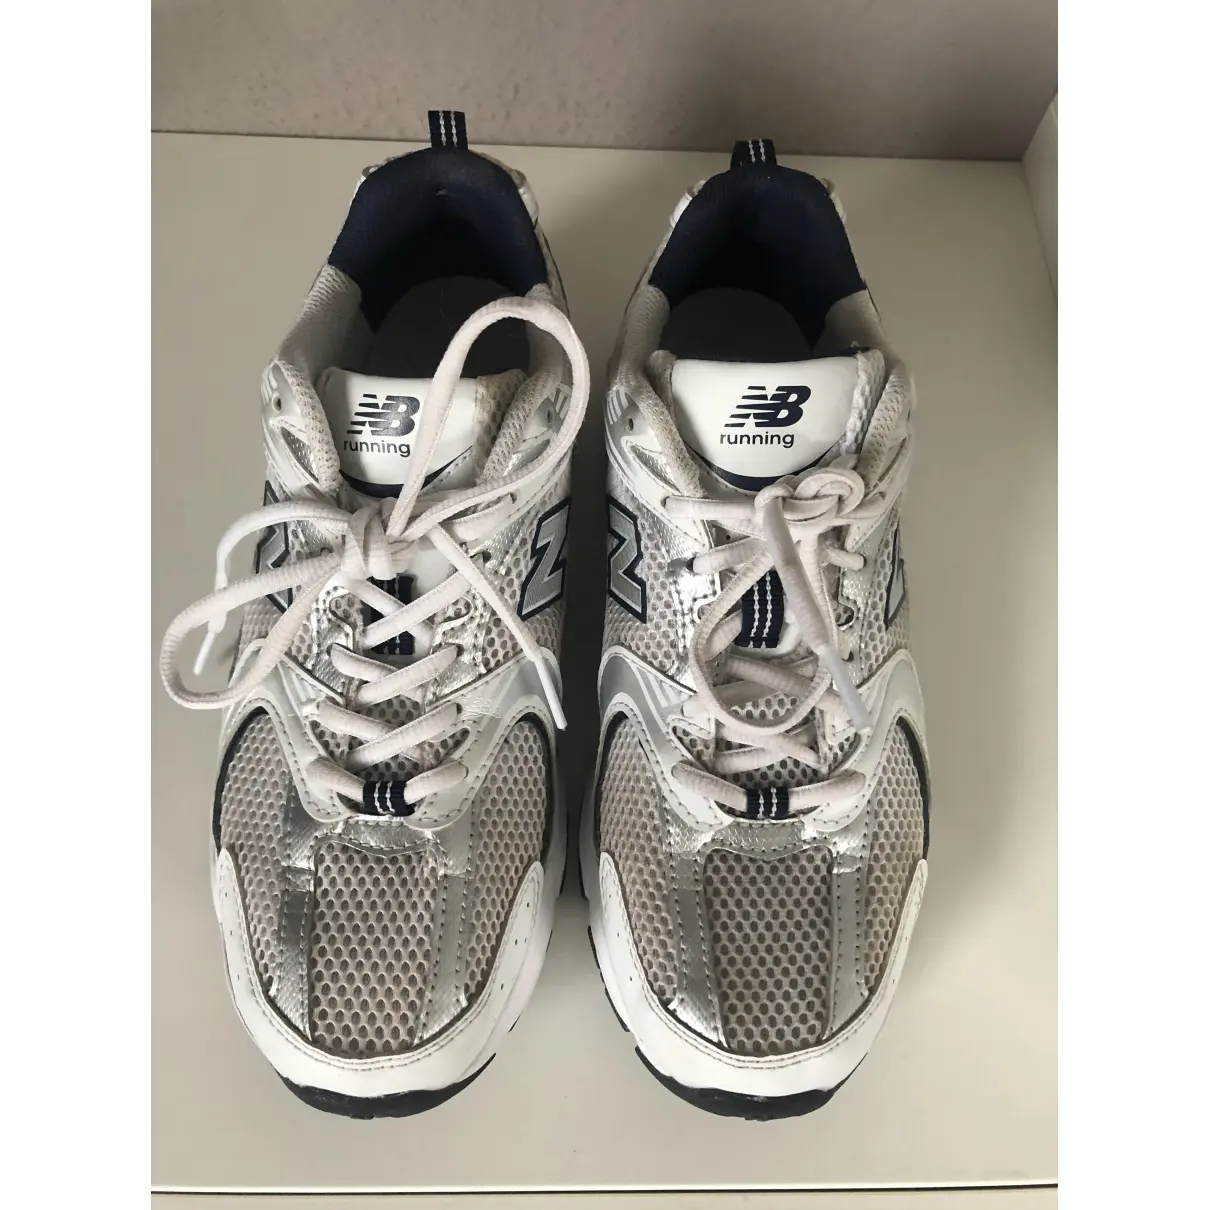 Buy New Balance Cloth trainers online